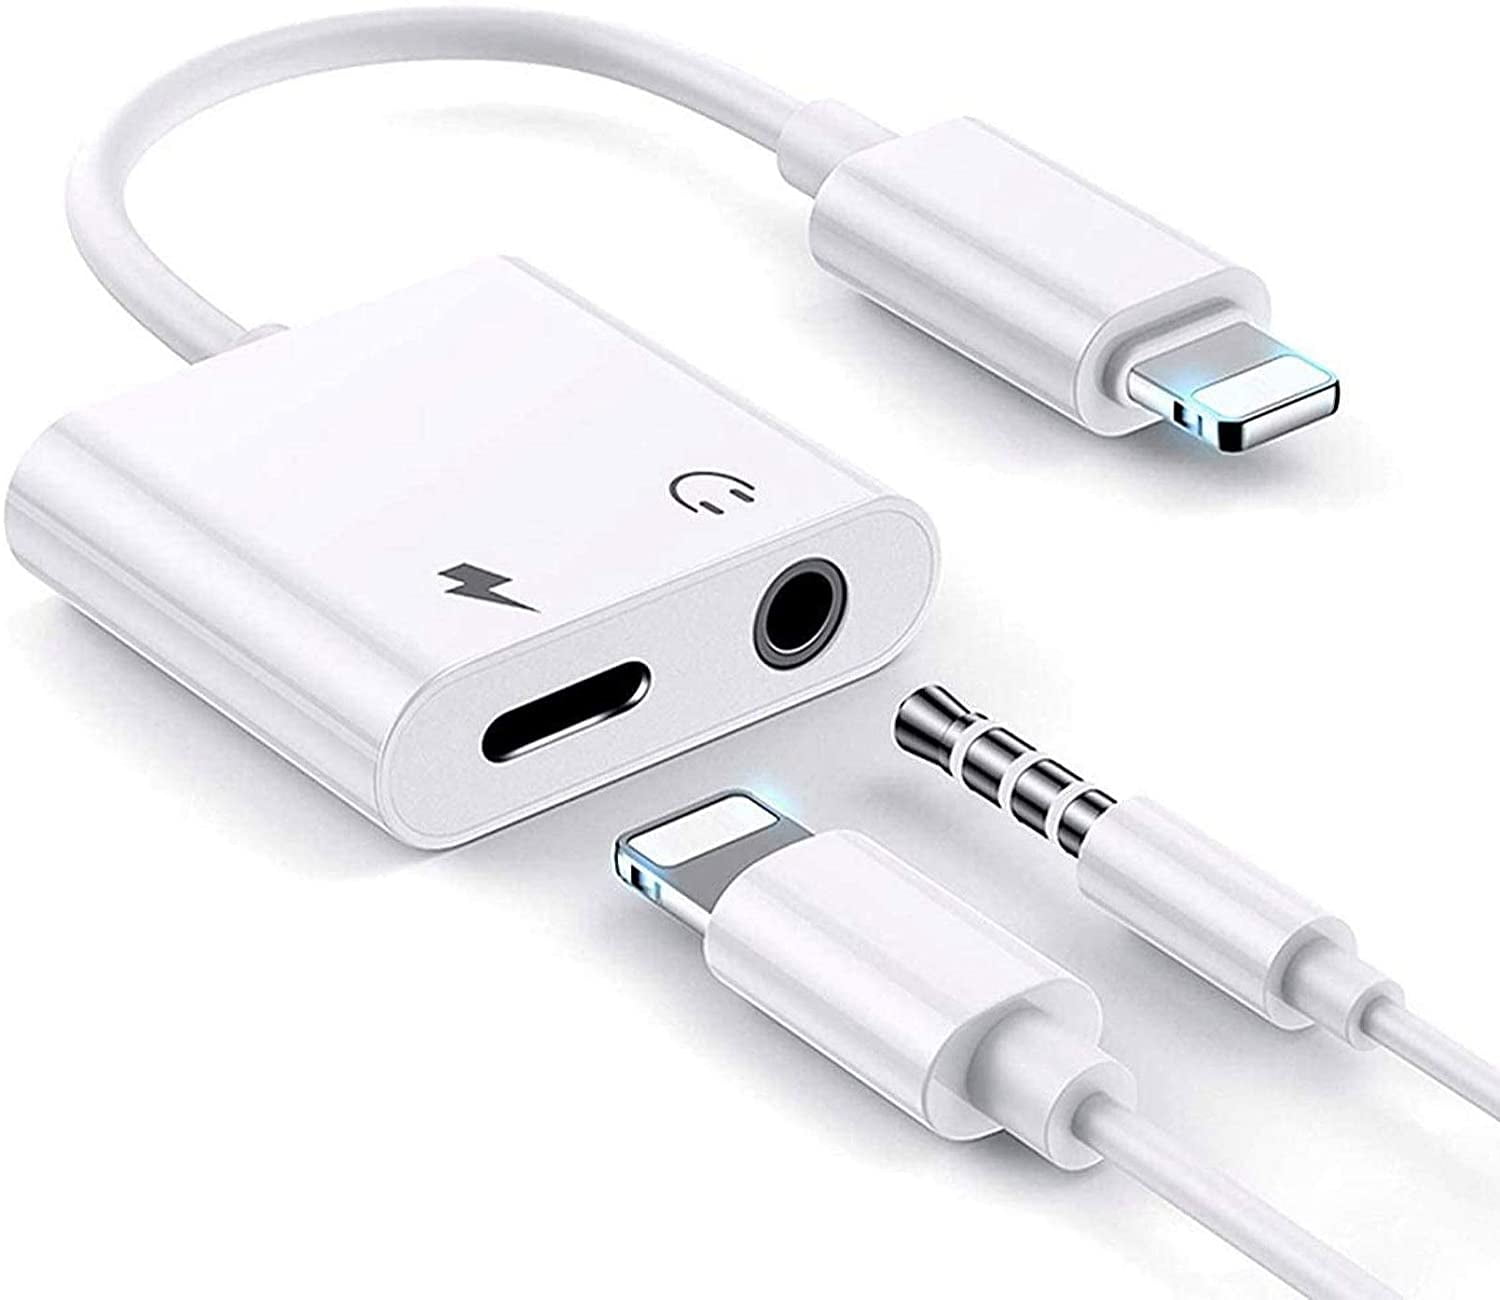 Apple MFi Certified Lightning Headphone Earphone Adapter Splitter 2 in 1 Jack Adapter Cable Connector Audio & Charger Compatible Support iOS 12 or Later for iPhone11/X/XR/XS/XS max/8/7